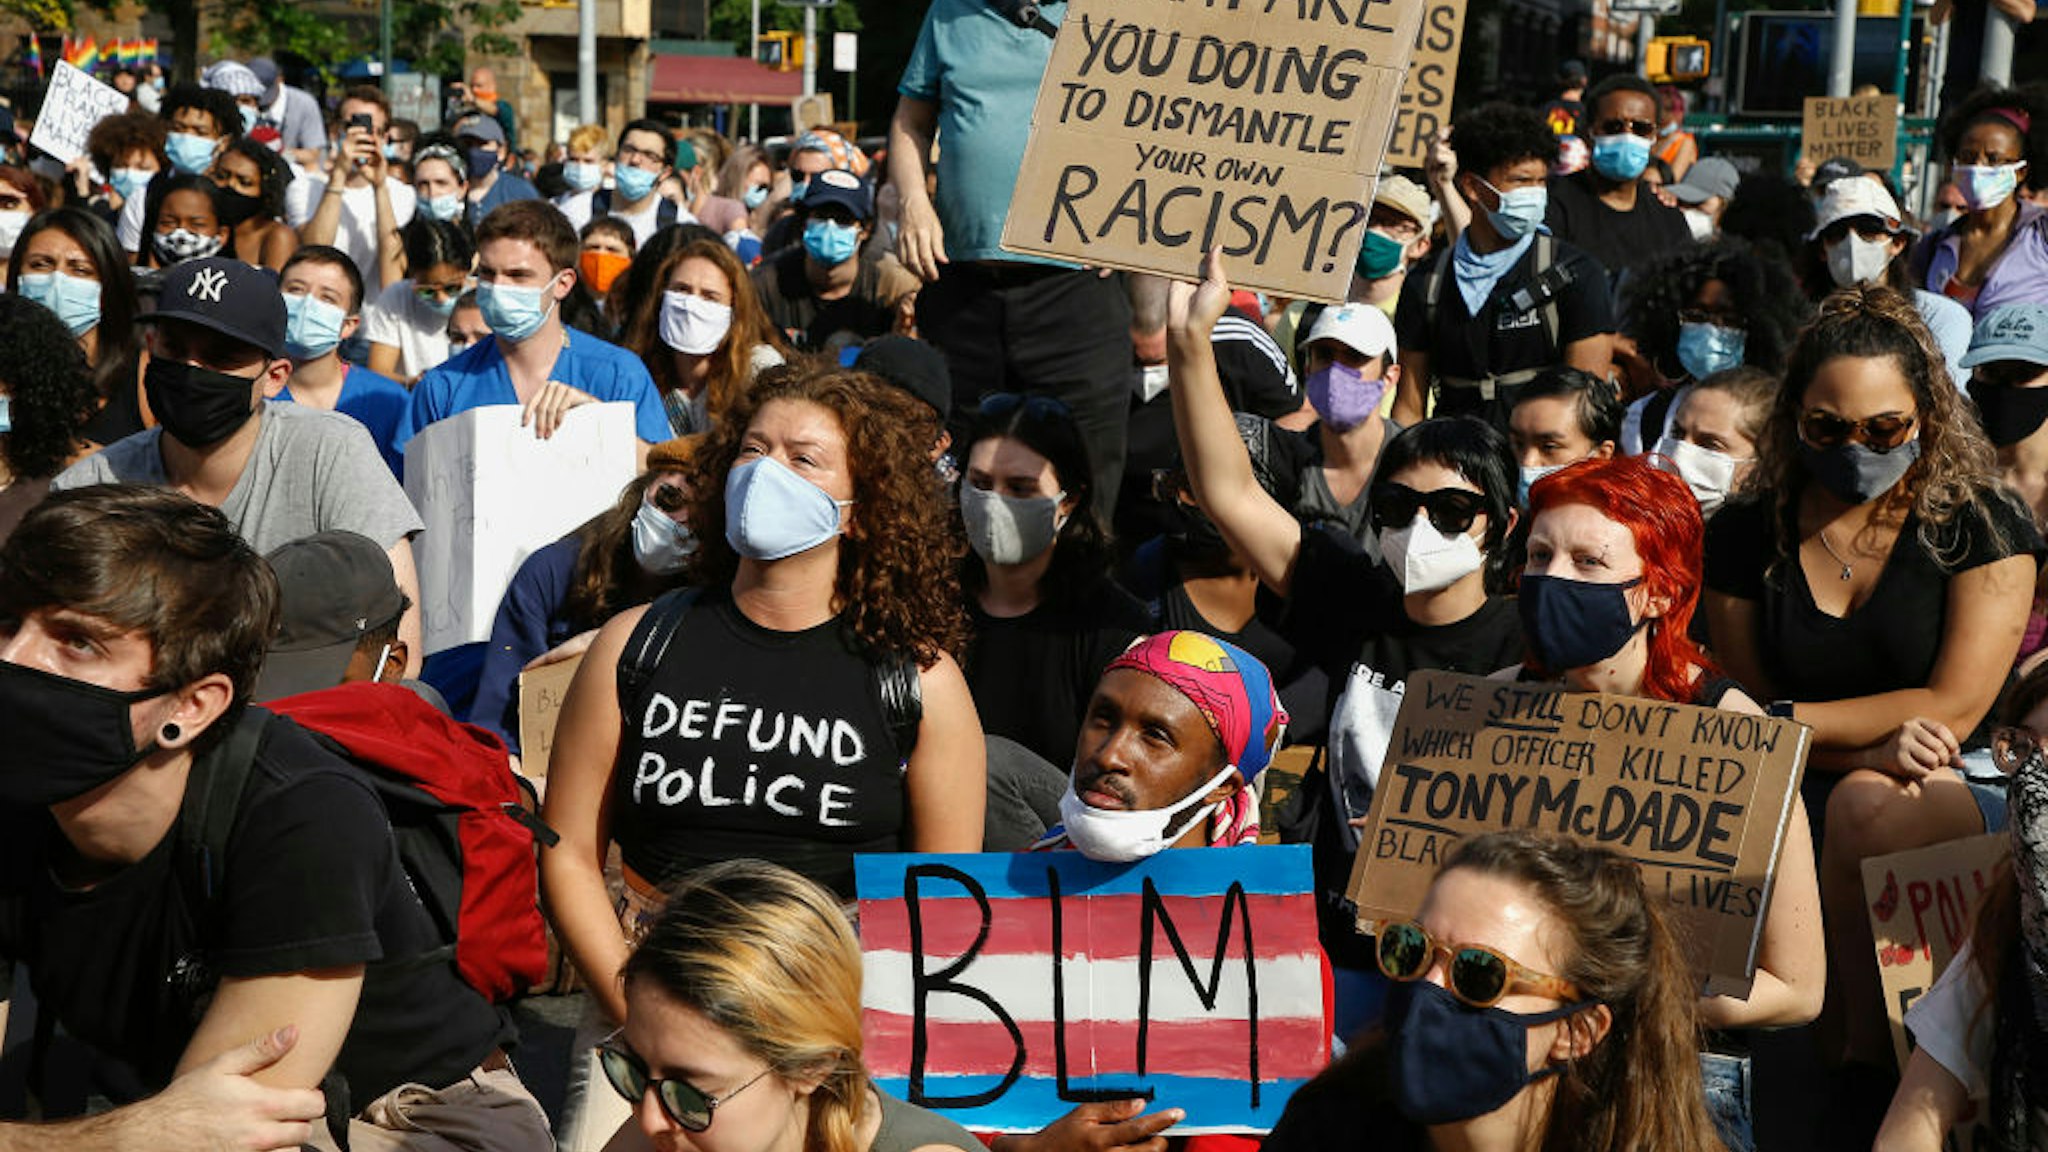 NEW YORK, UNITED STATES - 2020/06/15: Protesters hold placards during the demonstration. Protests continue against police brutality and racial injustice in New York City. (Photo by John Lamparski/SOPA Images/LightRocket via Getty Images)